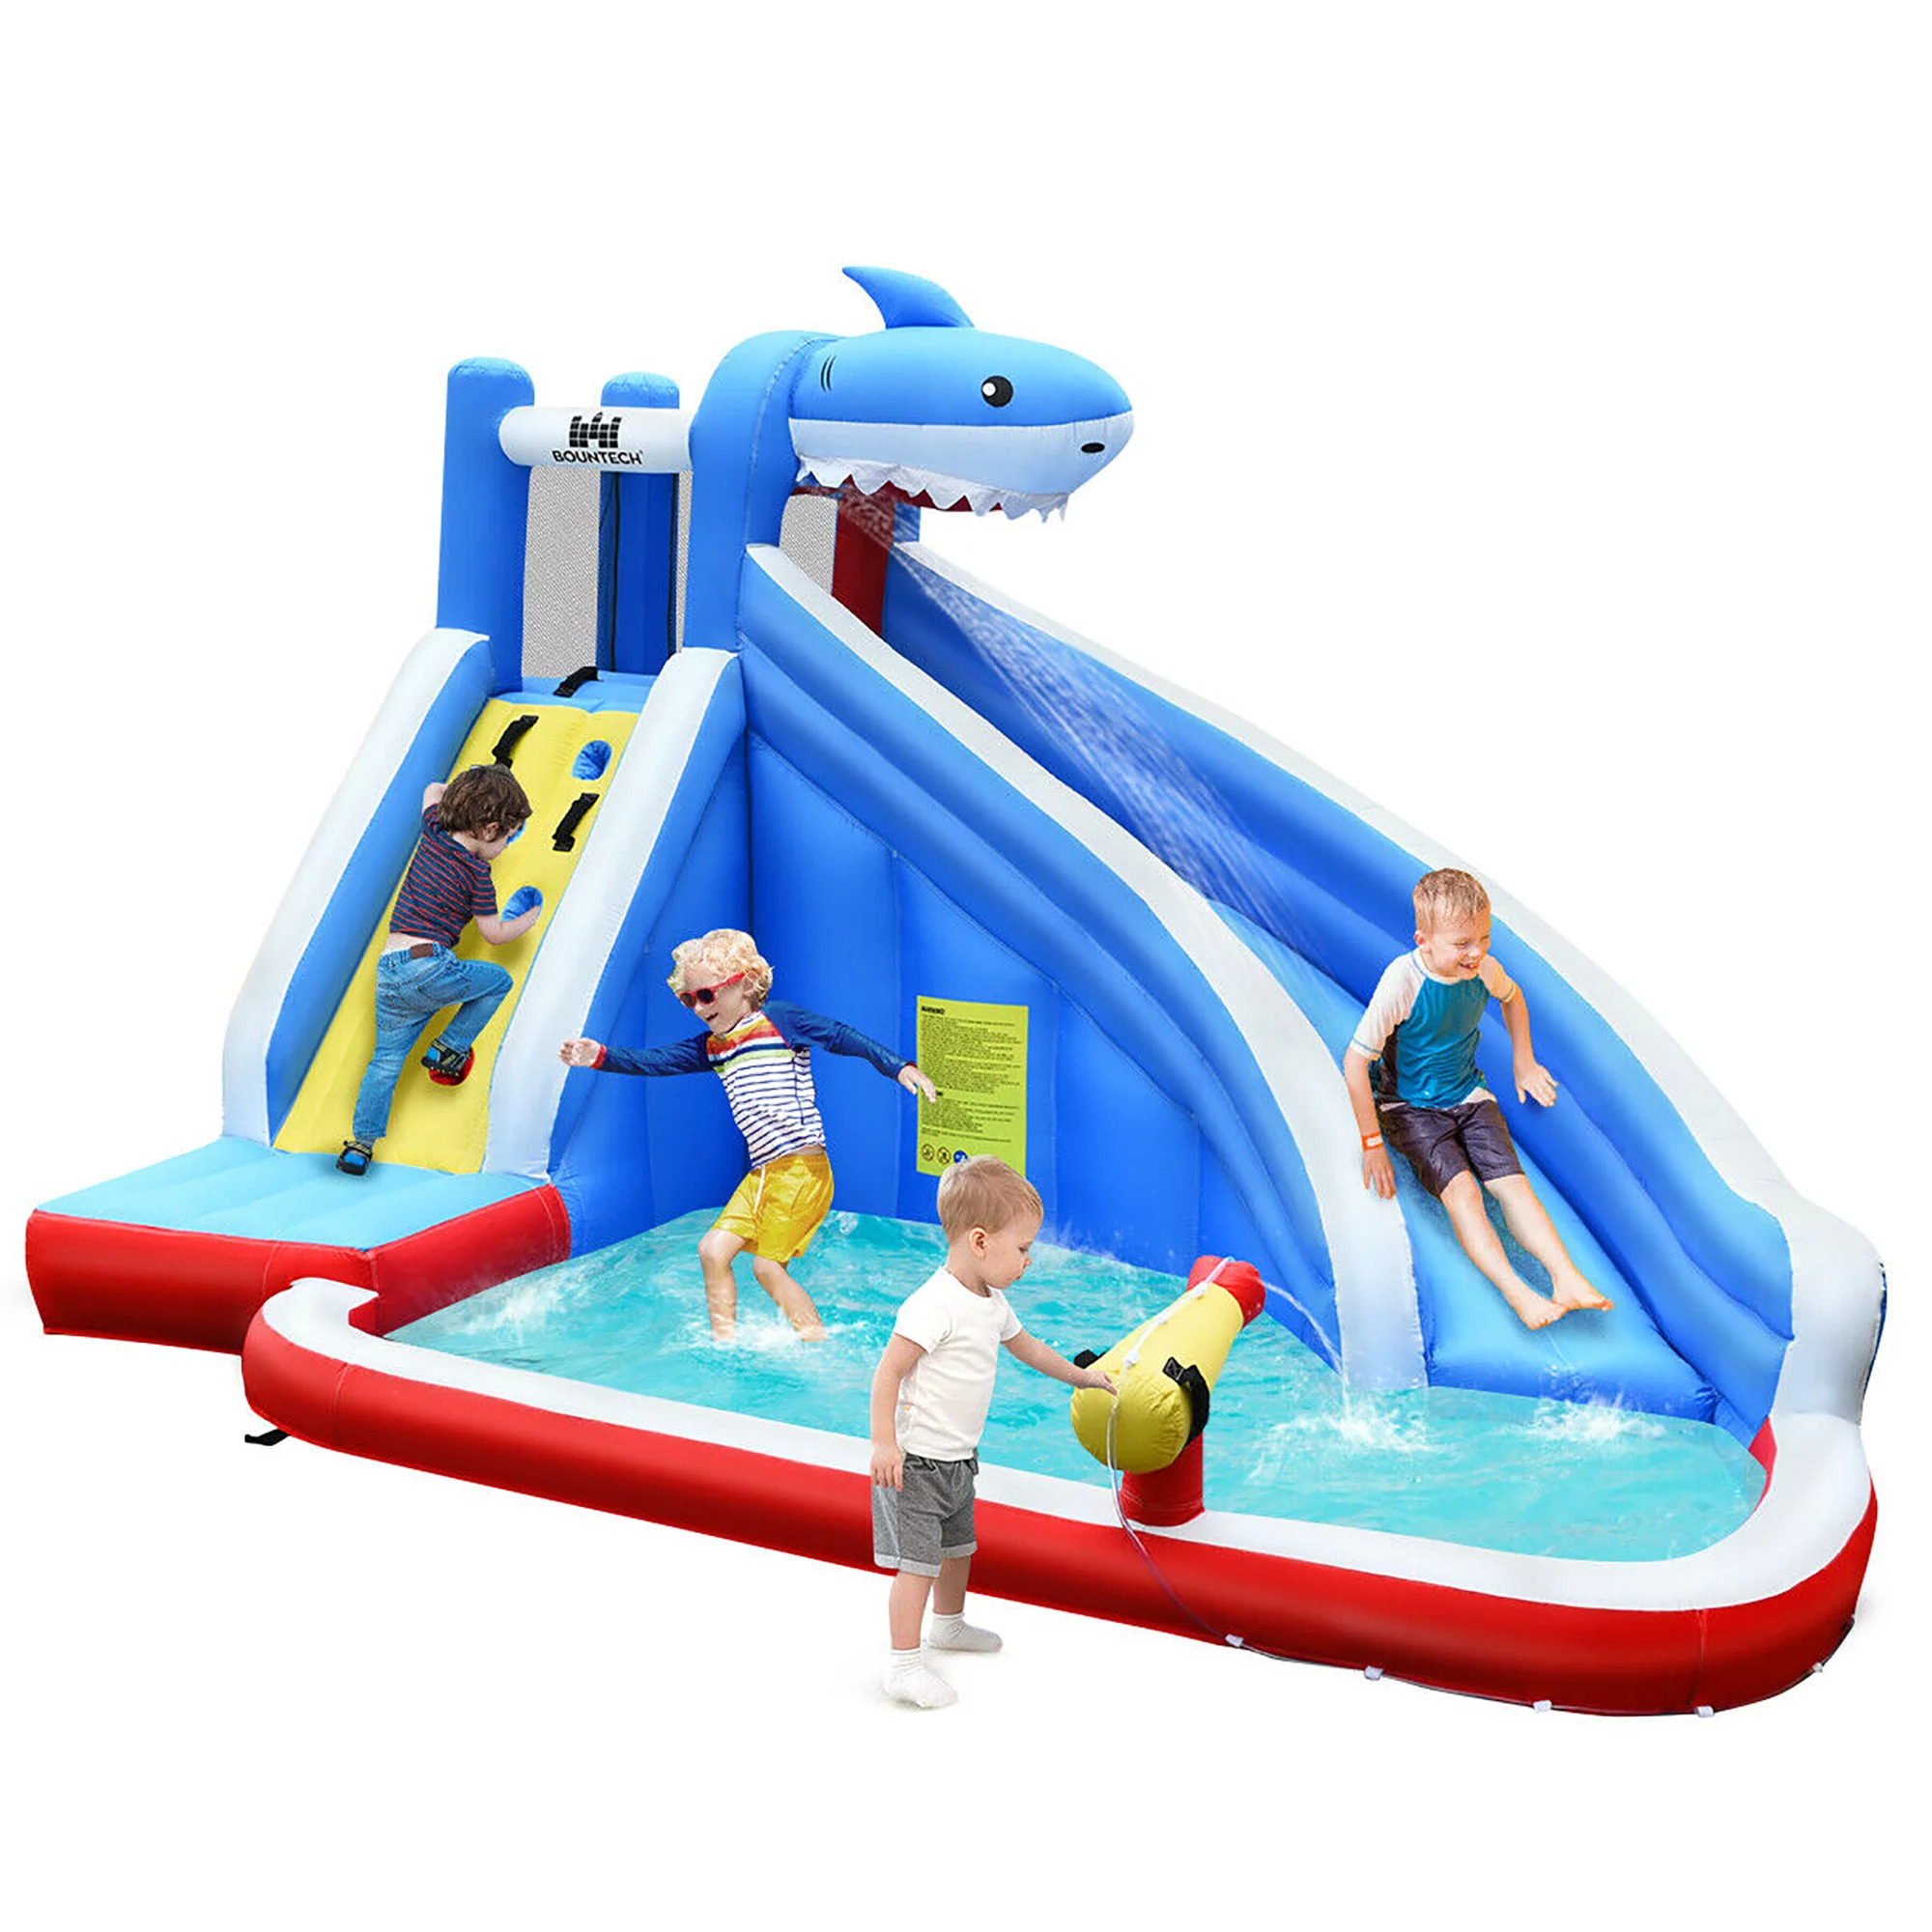 Costway Inflatable Shark Shaped Inflatable Water Bounce House w/ Water Slide & Pool, Climbing Wall + Water Cannon (w/o Blower) $190 + Free Shipping